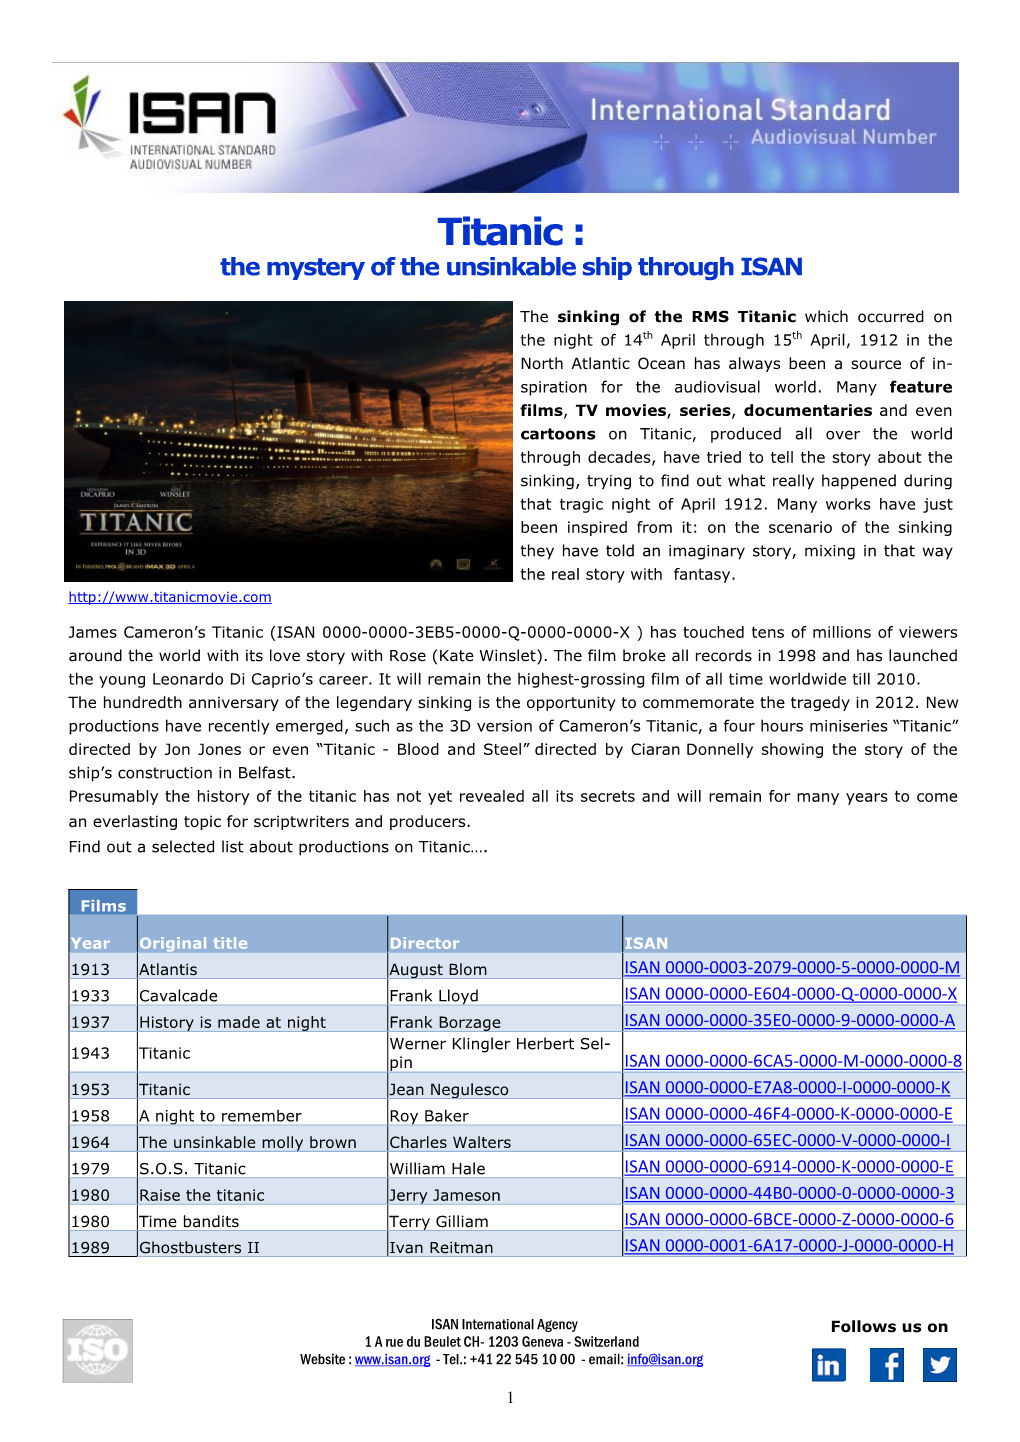 Titanic : the Mystery of the Unsinkable Ship Through ISAN